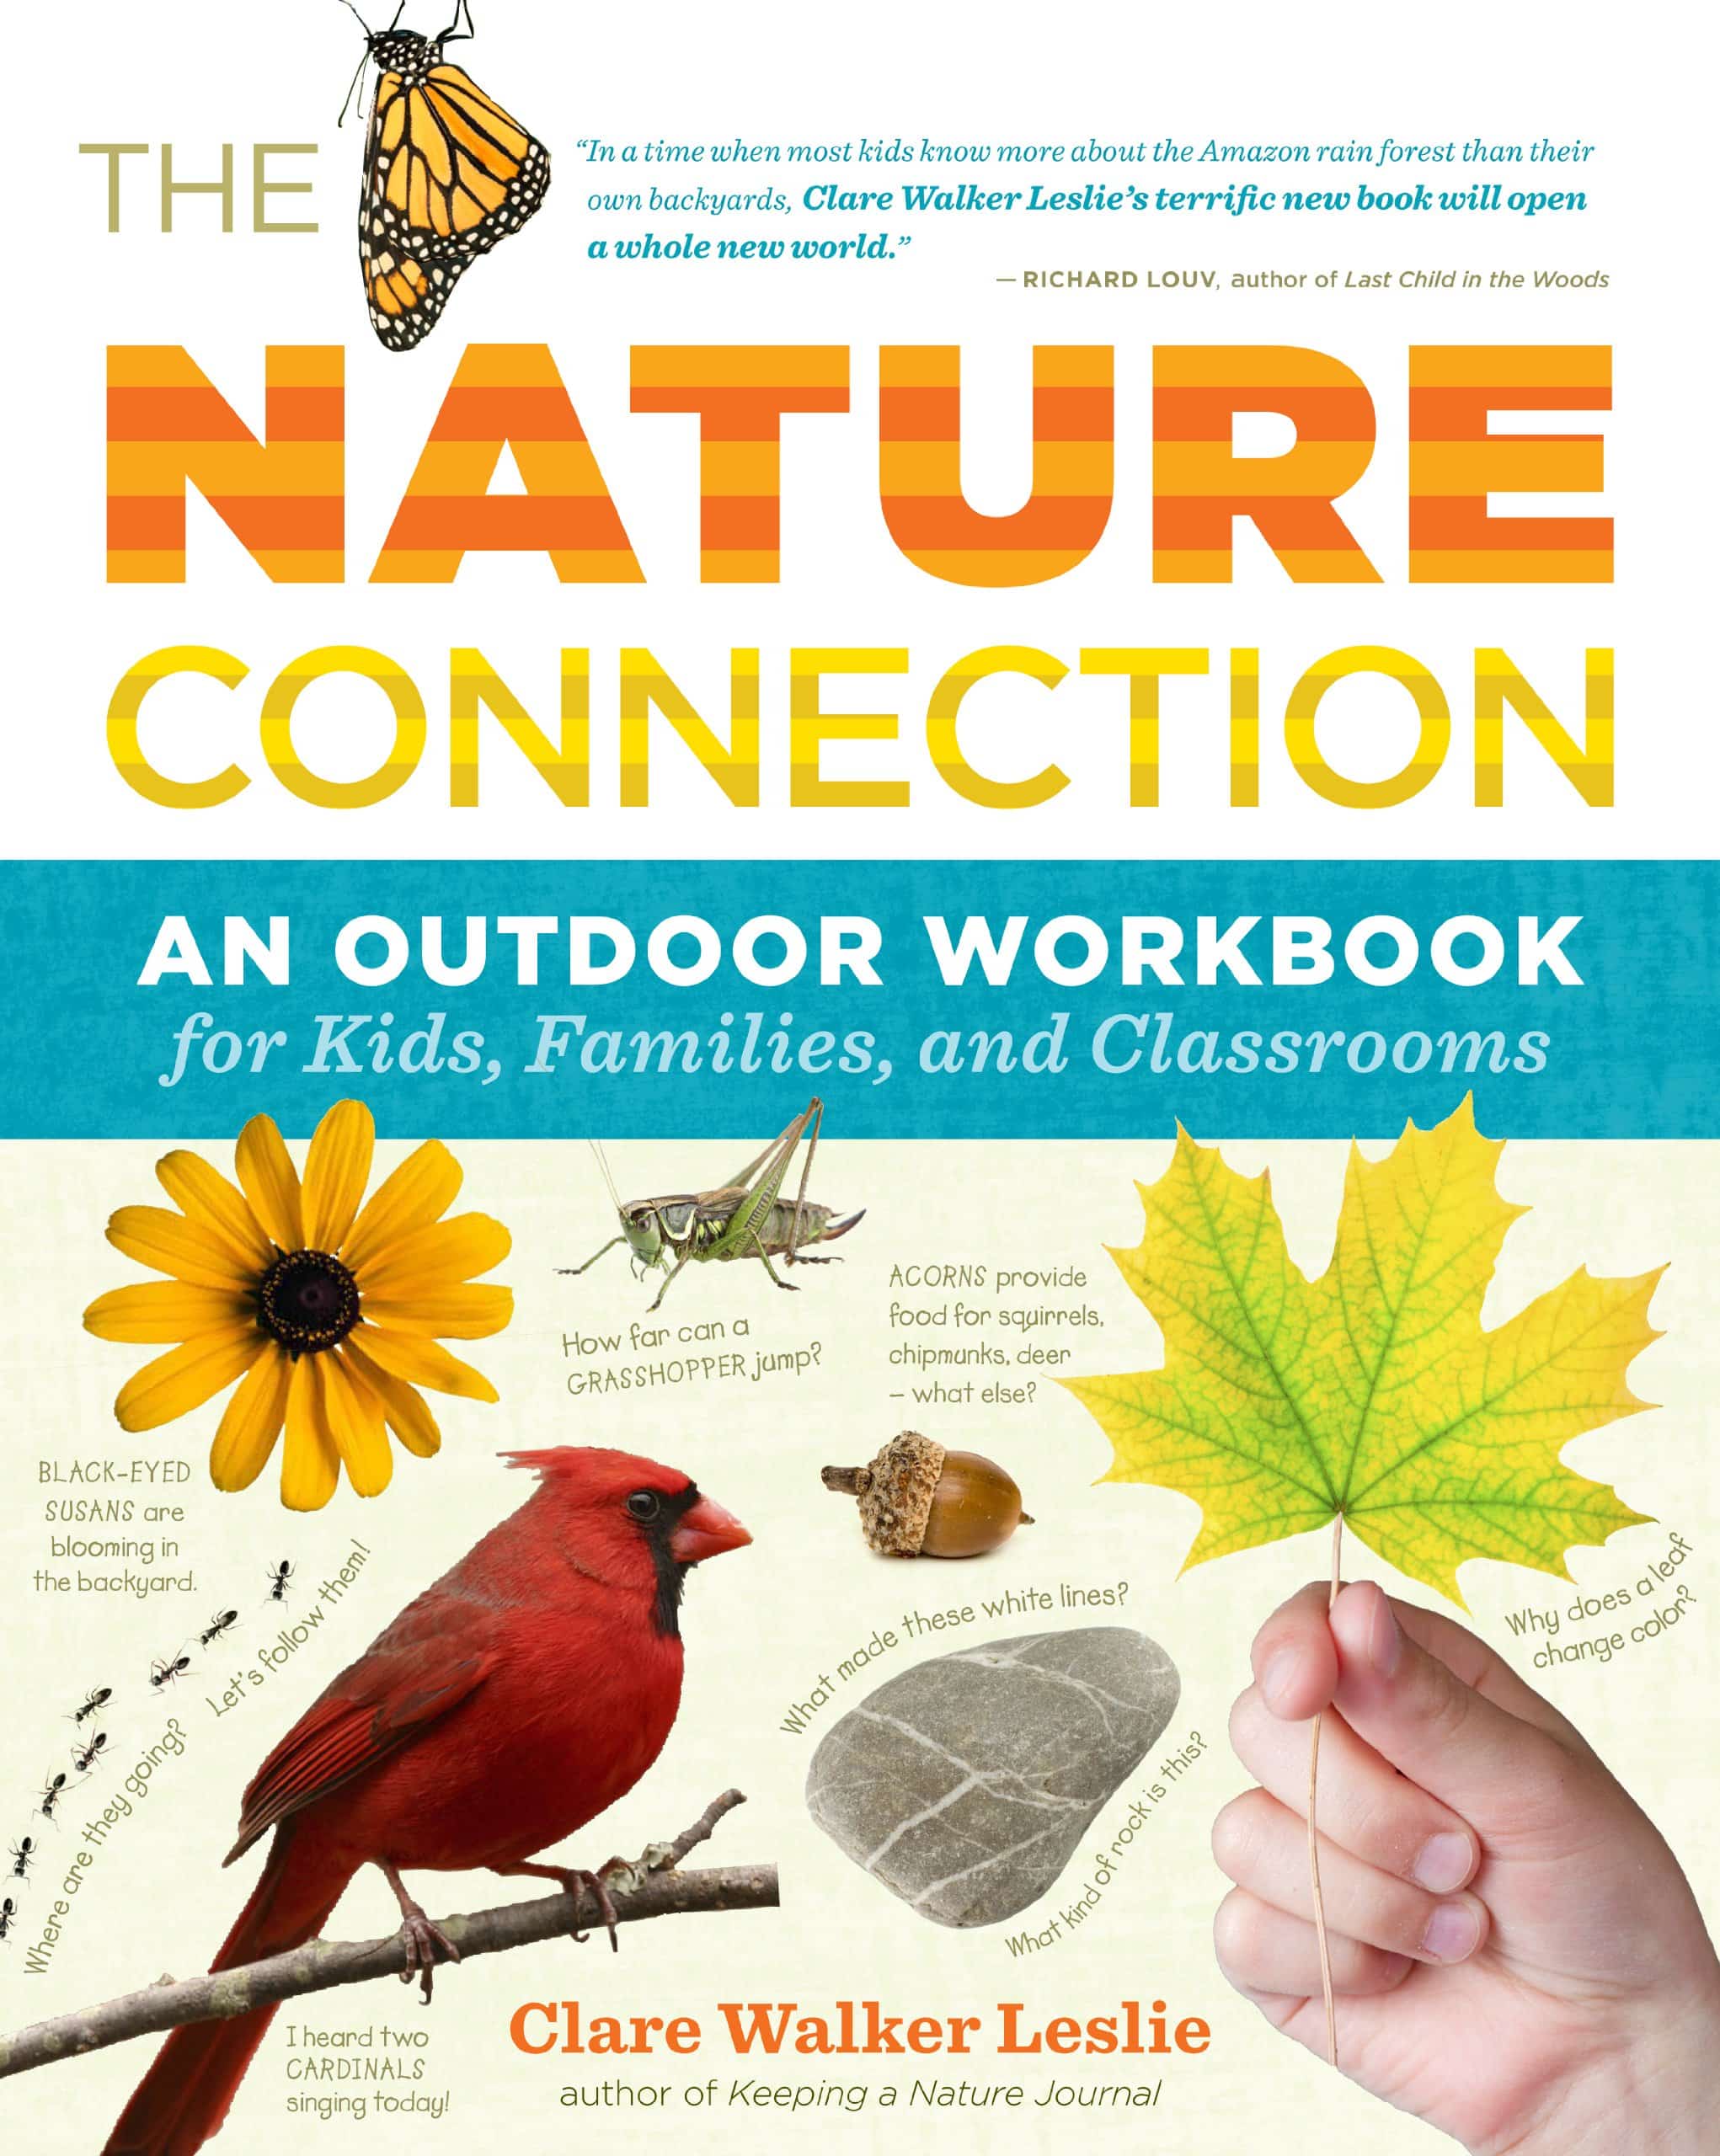 DEAL ALERT: Nature Connection: An Outdoor Workbook – 59% off and 4.5 stars!